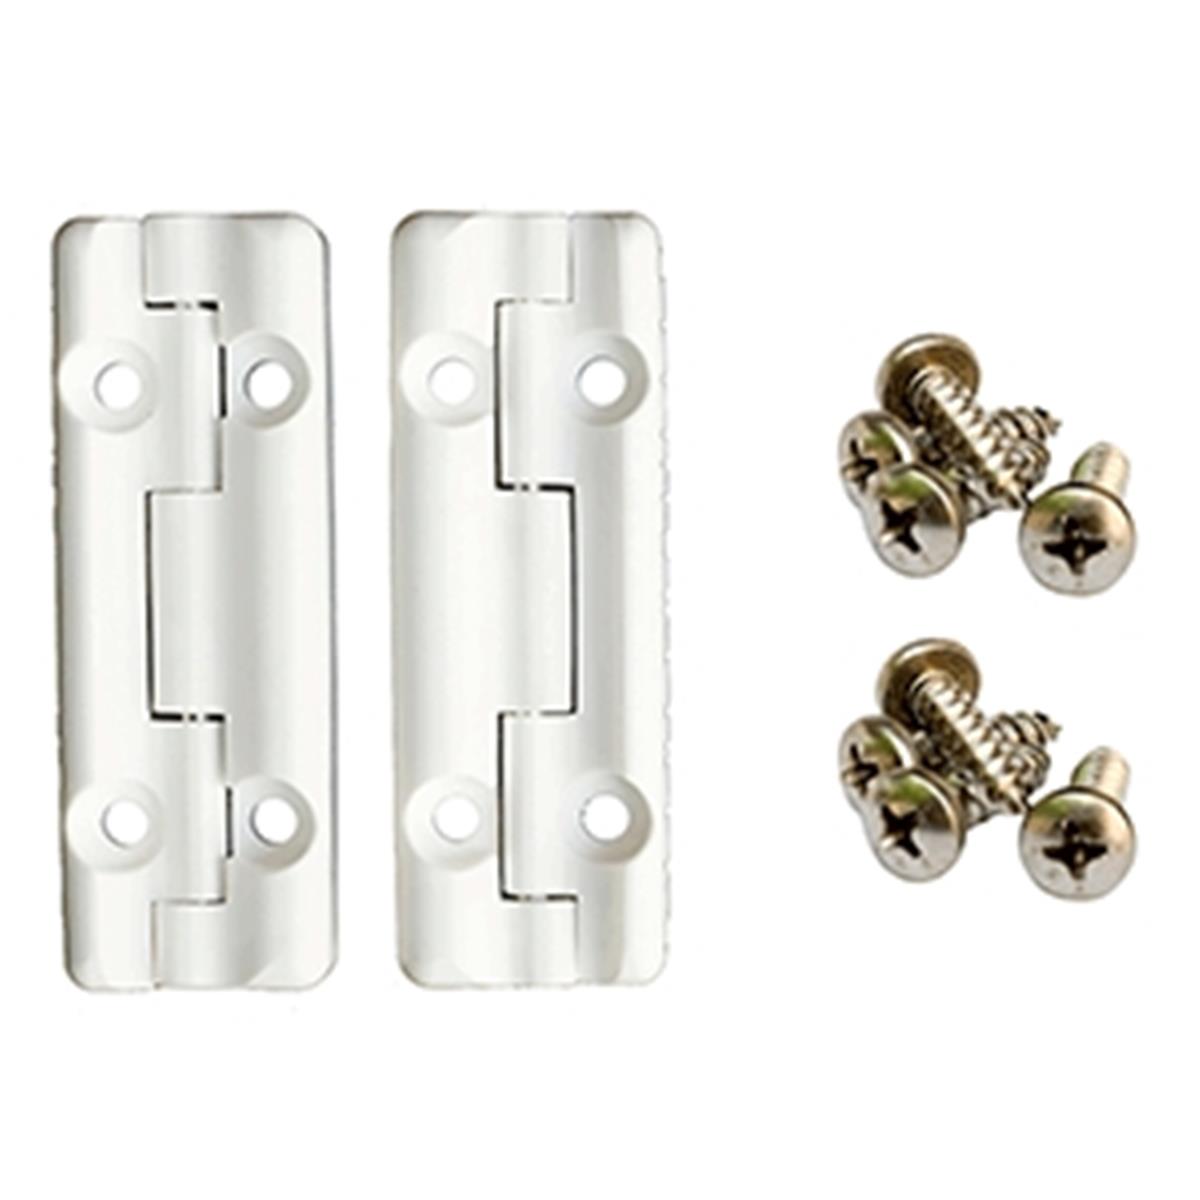 Ca76310 Replacement Hinge For Igloo Coolers - Pack Of 2